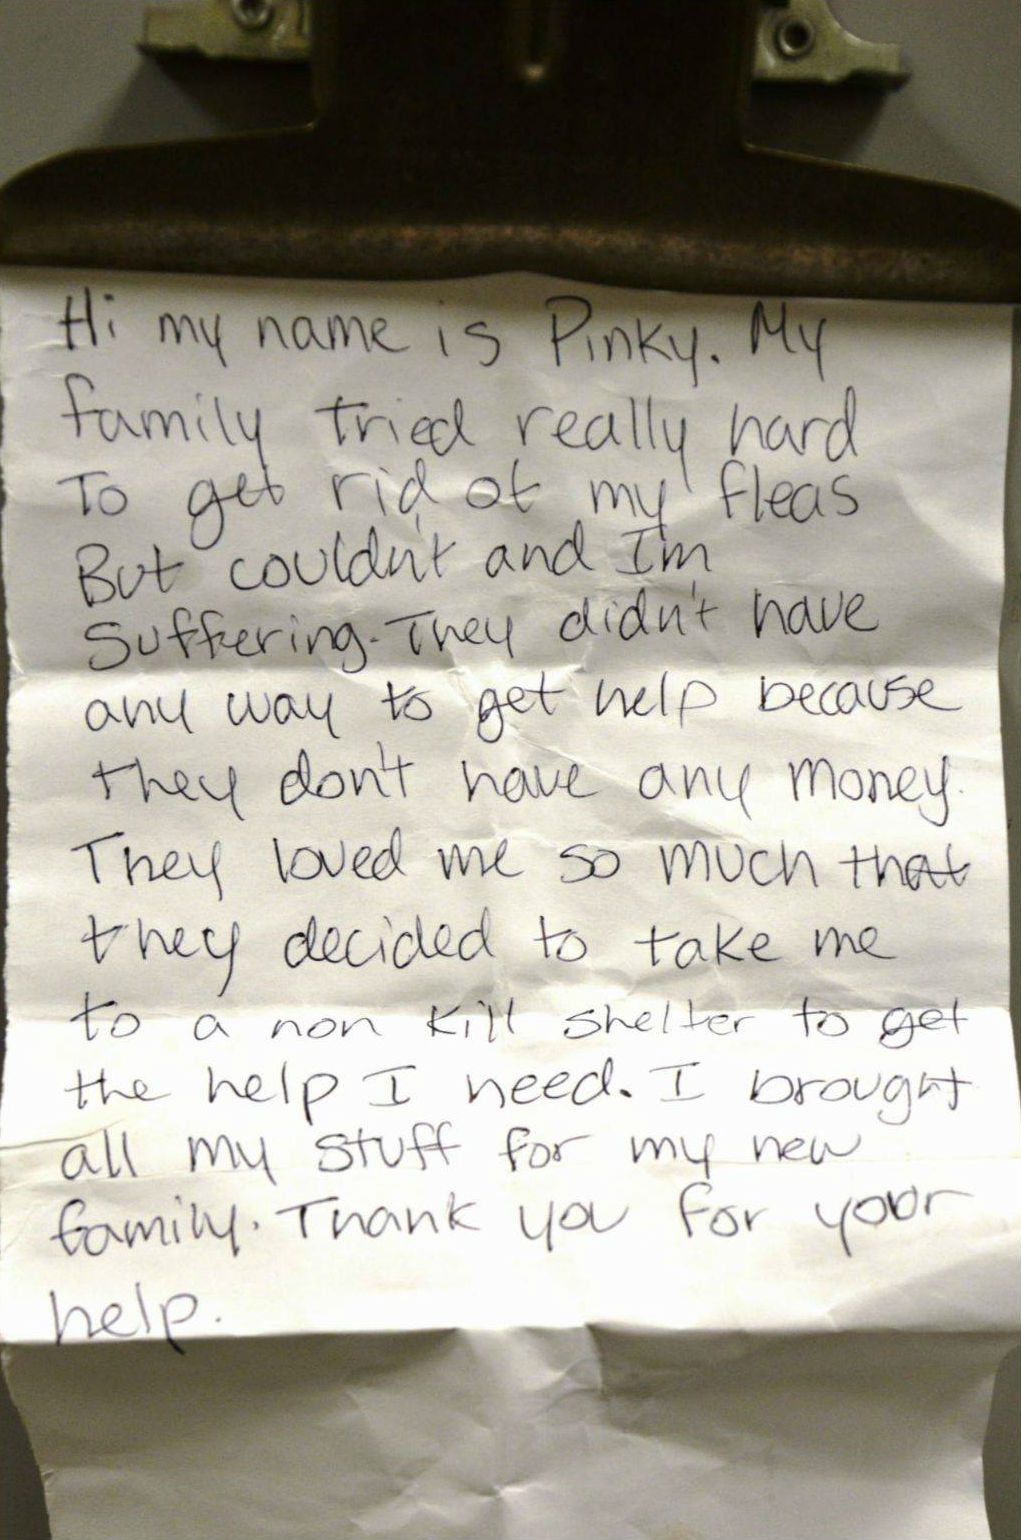 Dog Surrendered to Shelter with Tear-Jerking Note